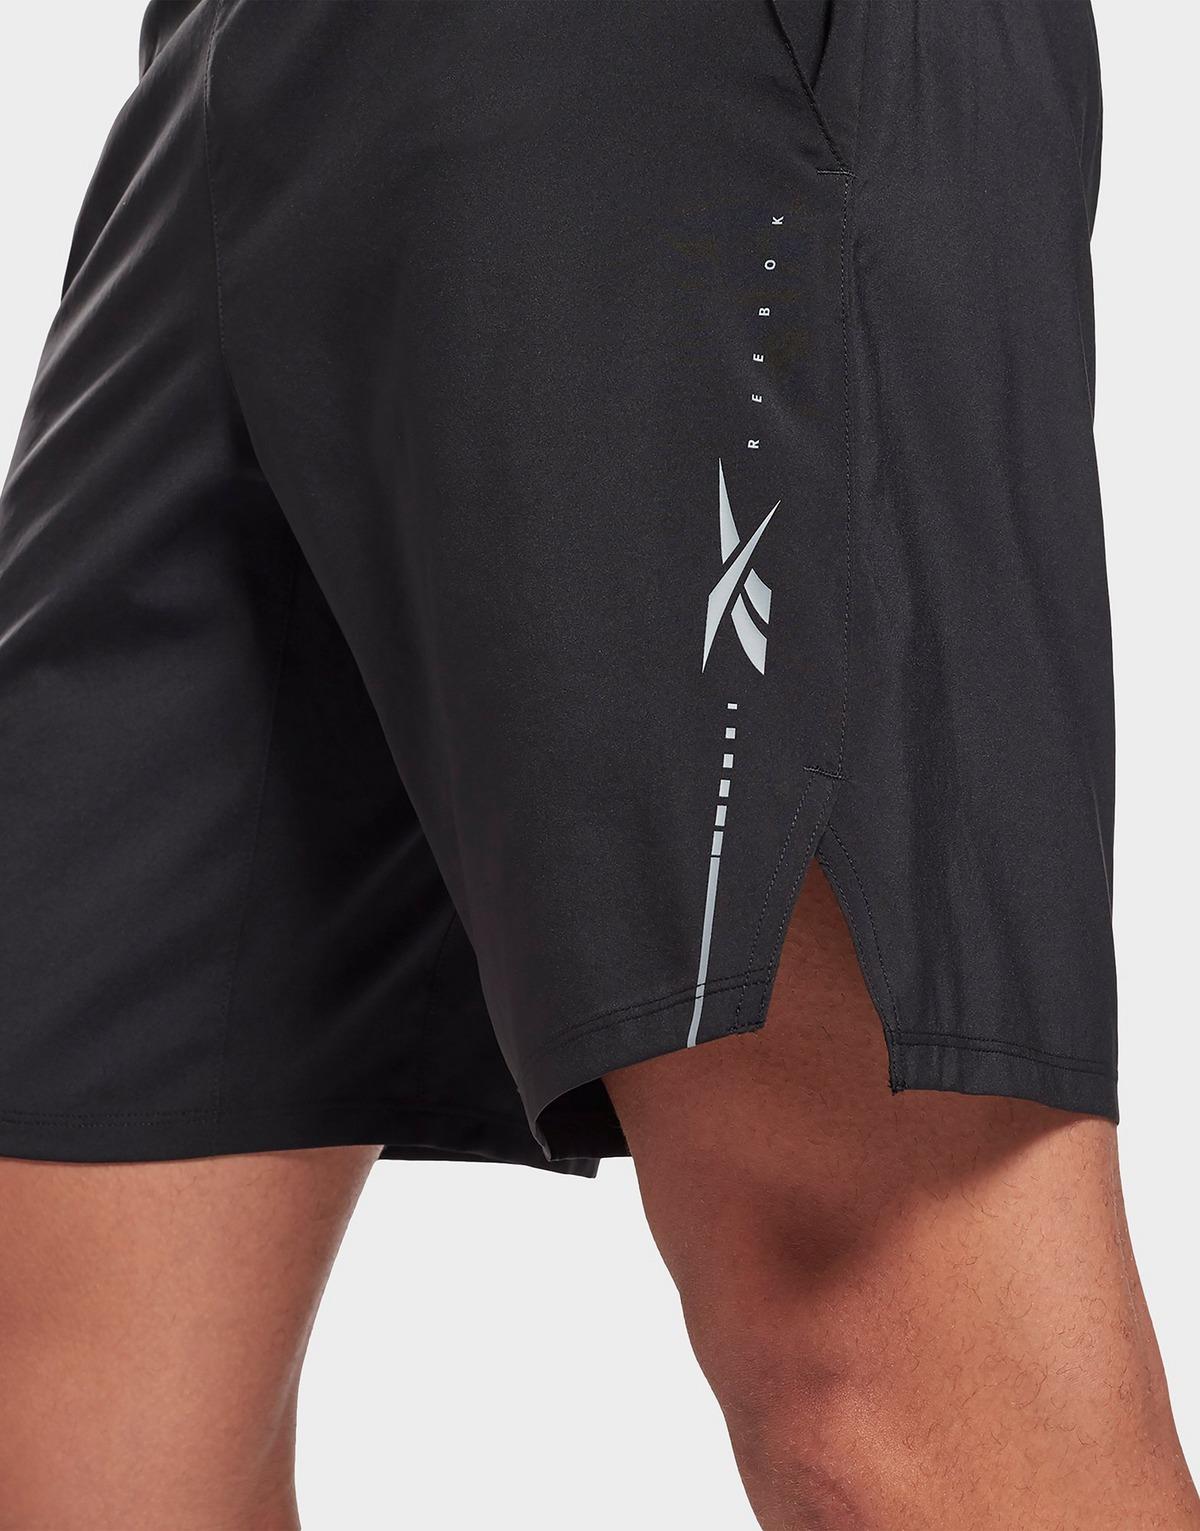 Reebok Synthetic Epic Lightweight Shorts in Black for Men - Lyst